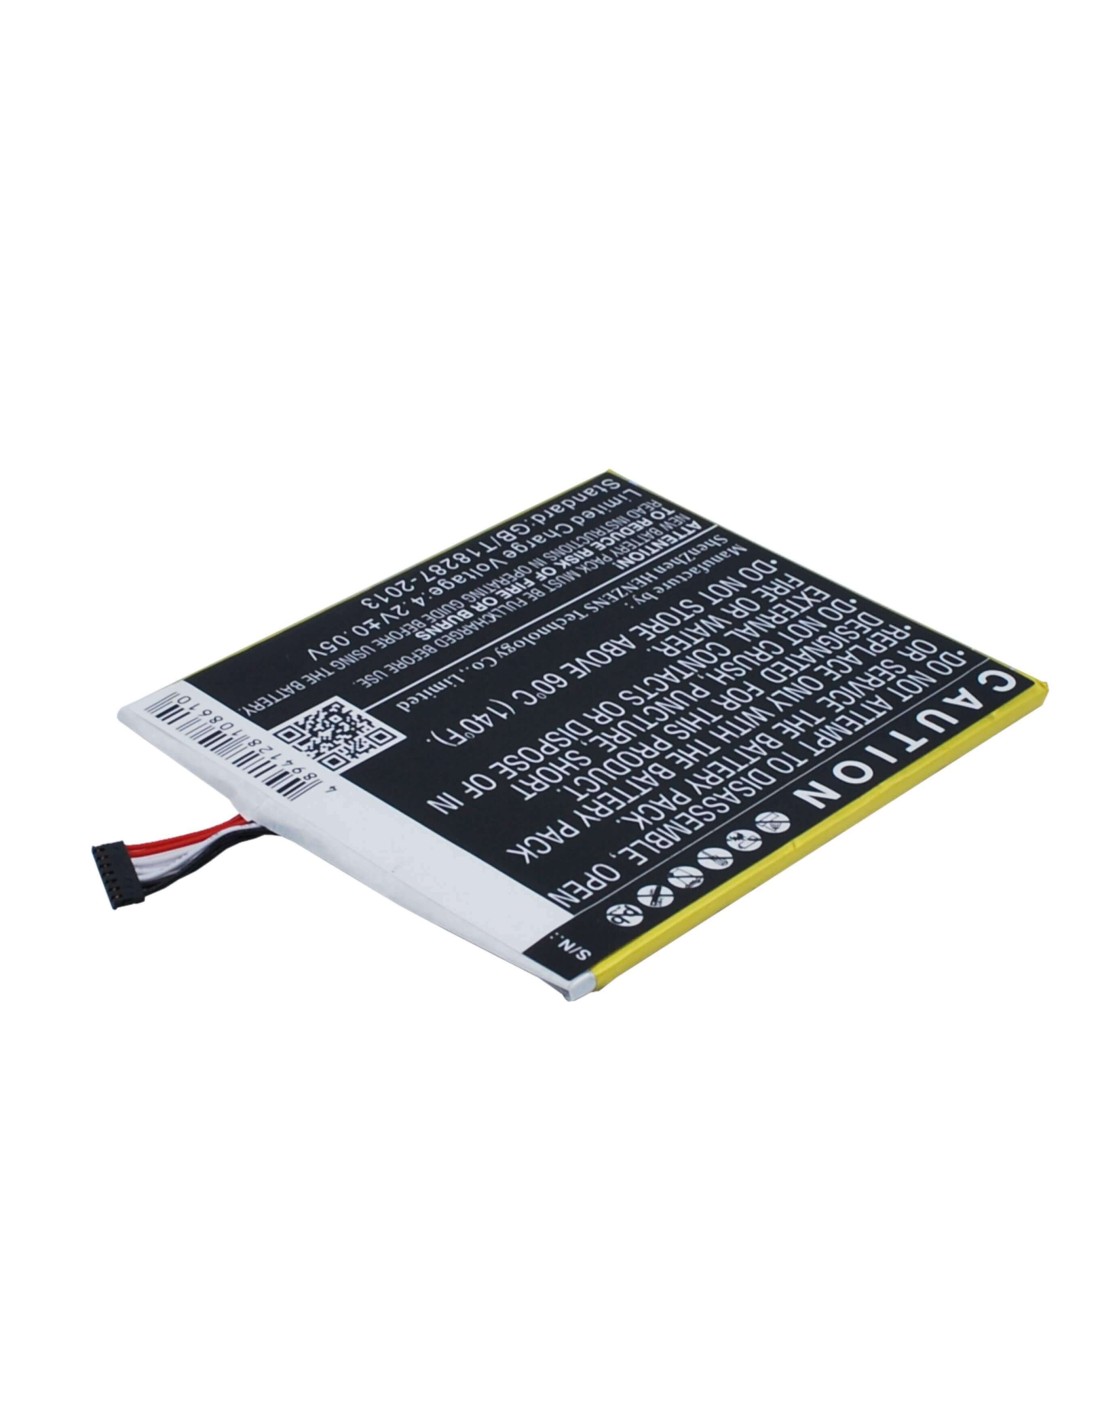 Battery for Amazon Kindle Fire Hd 7 Inch, Sq46cw 3.7V, 3500mAh - 12.95Wh